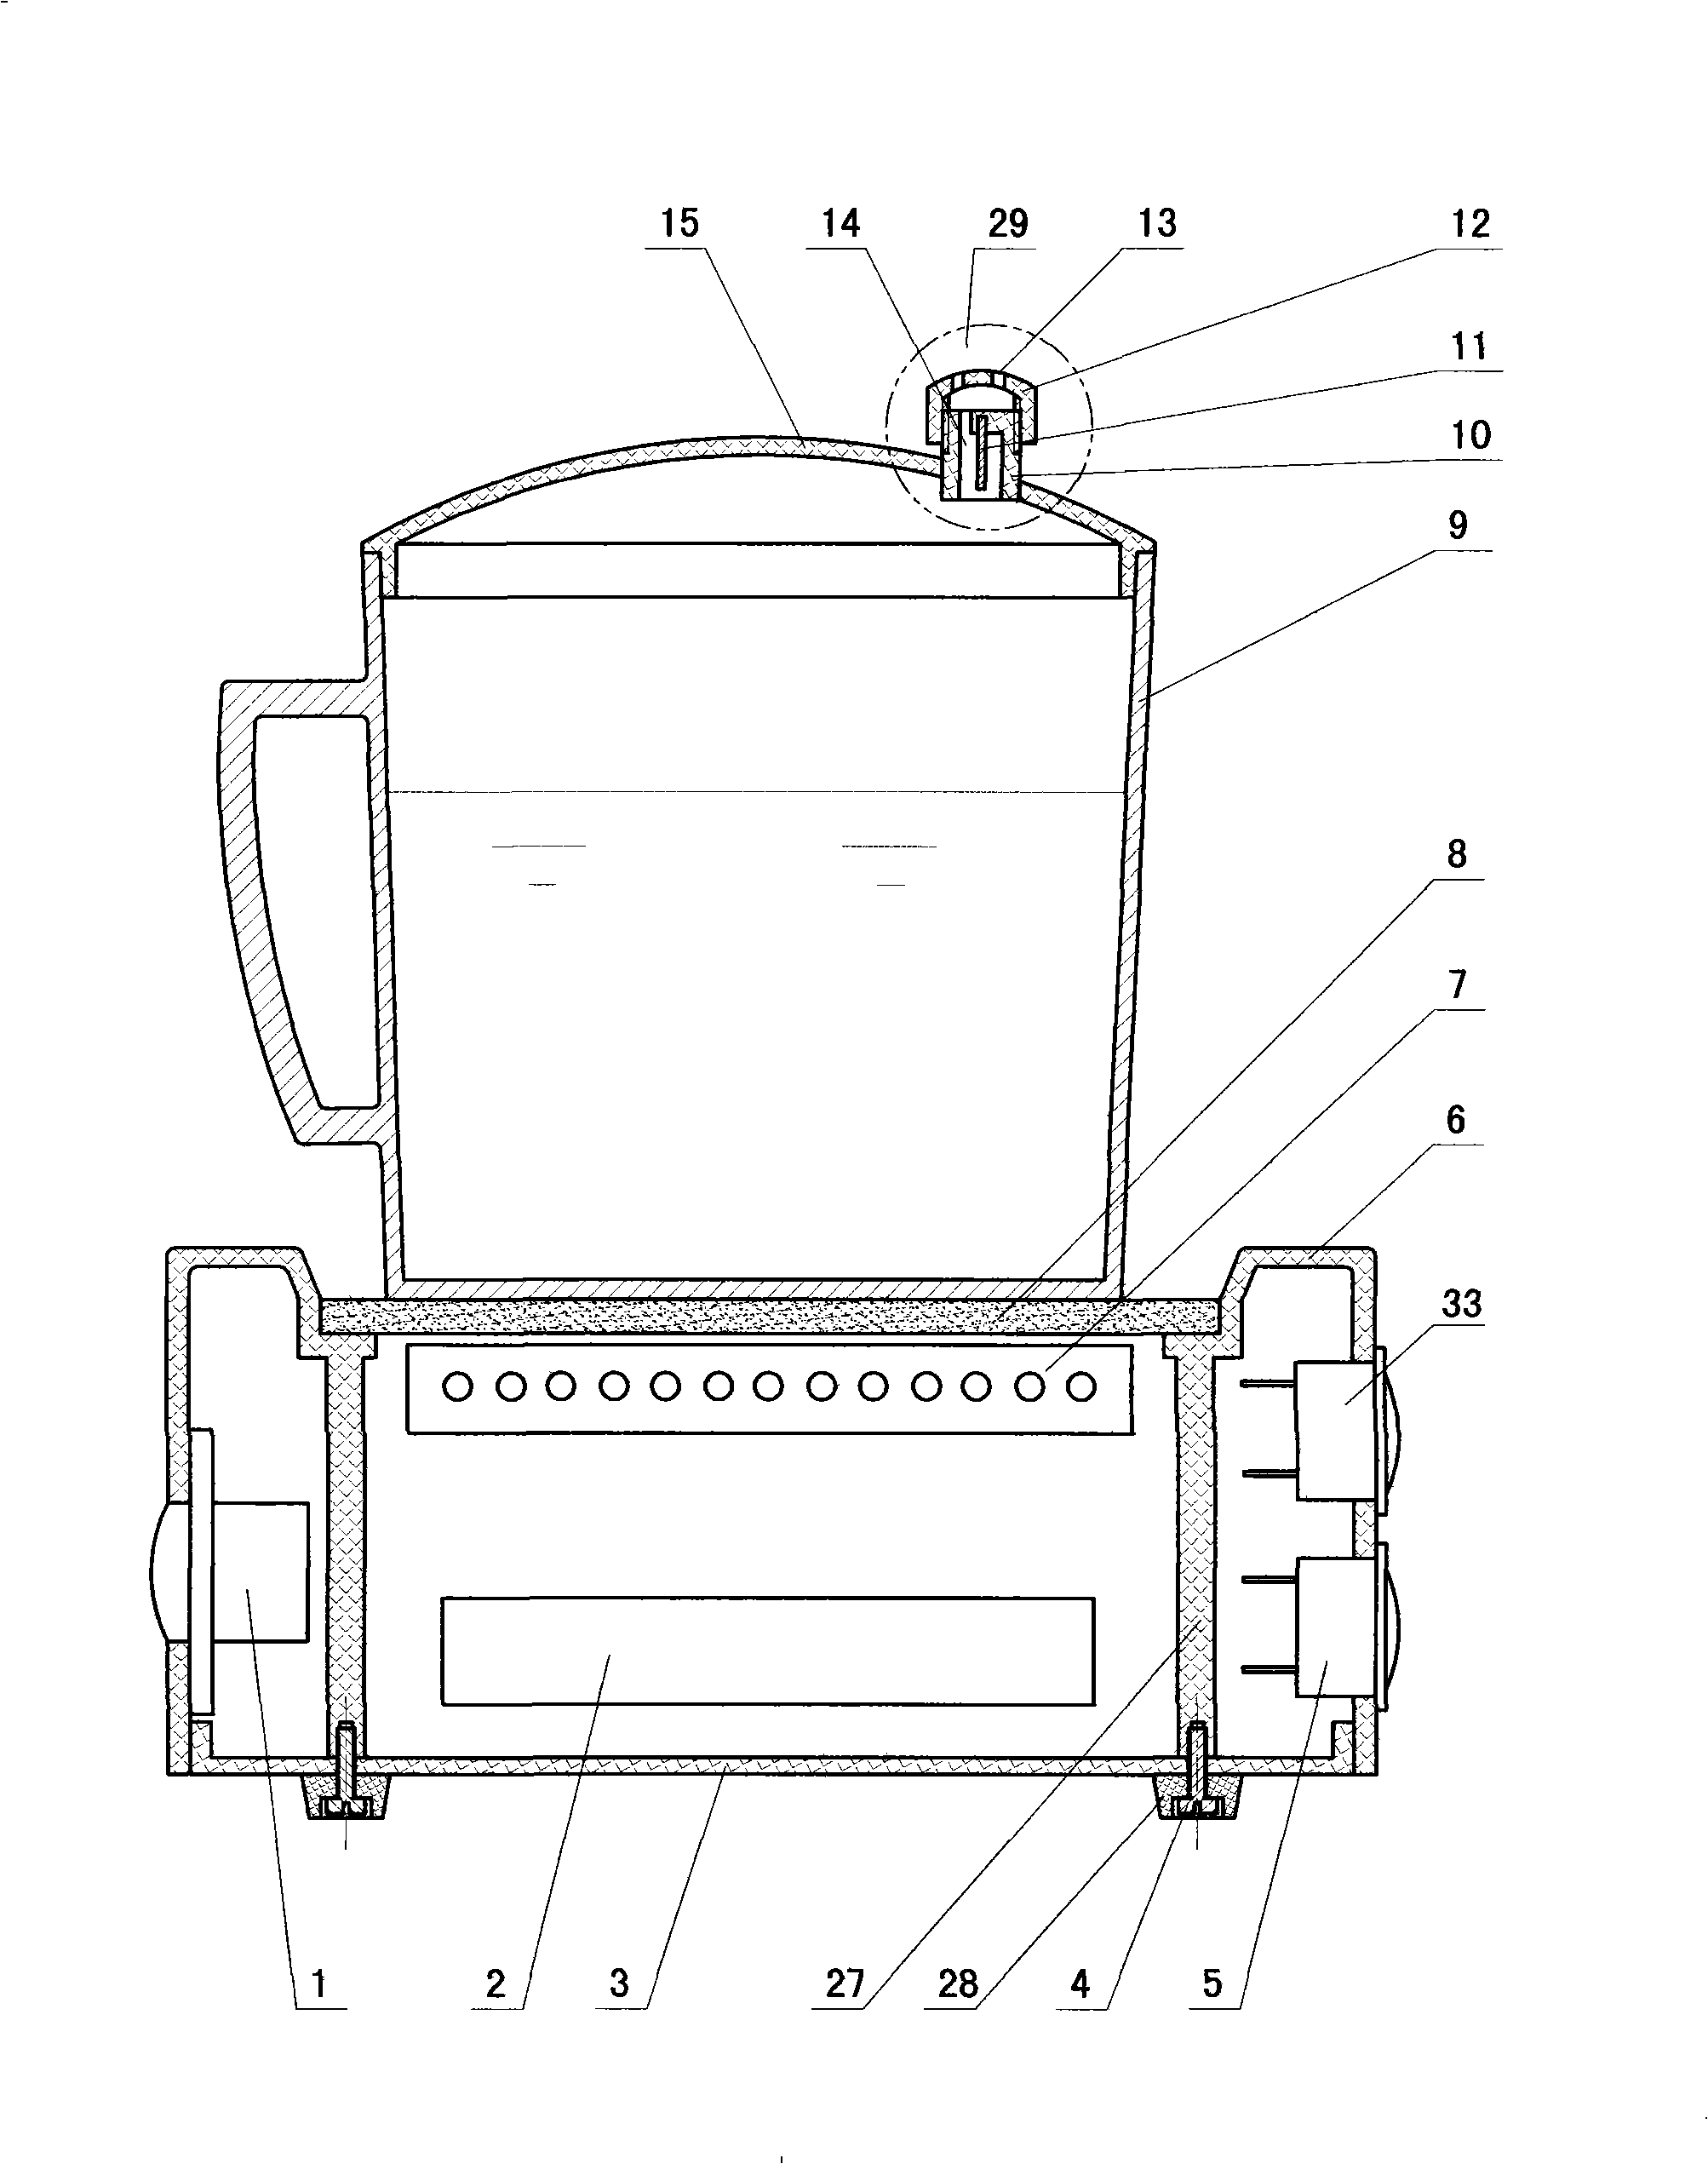 Method and apparatus for detecting and controlling liquid boiling